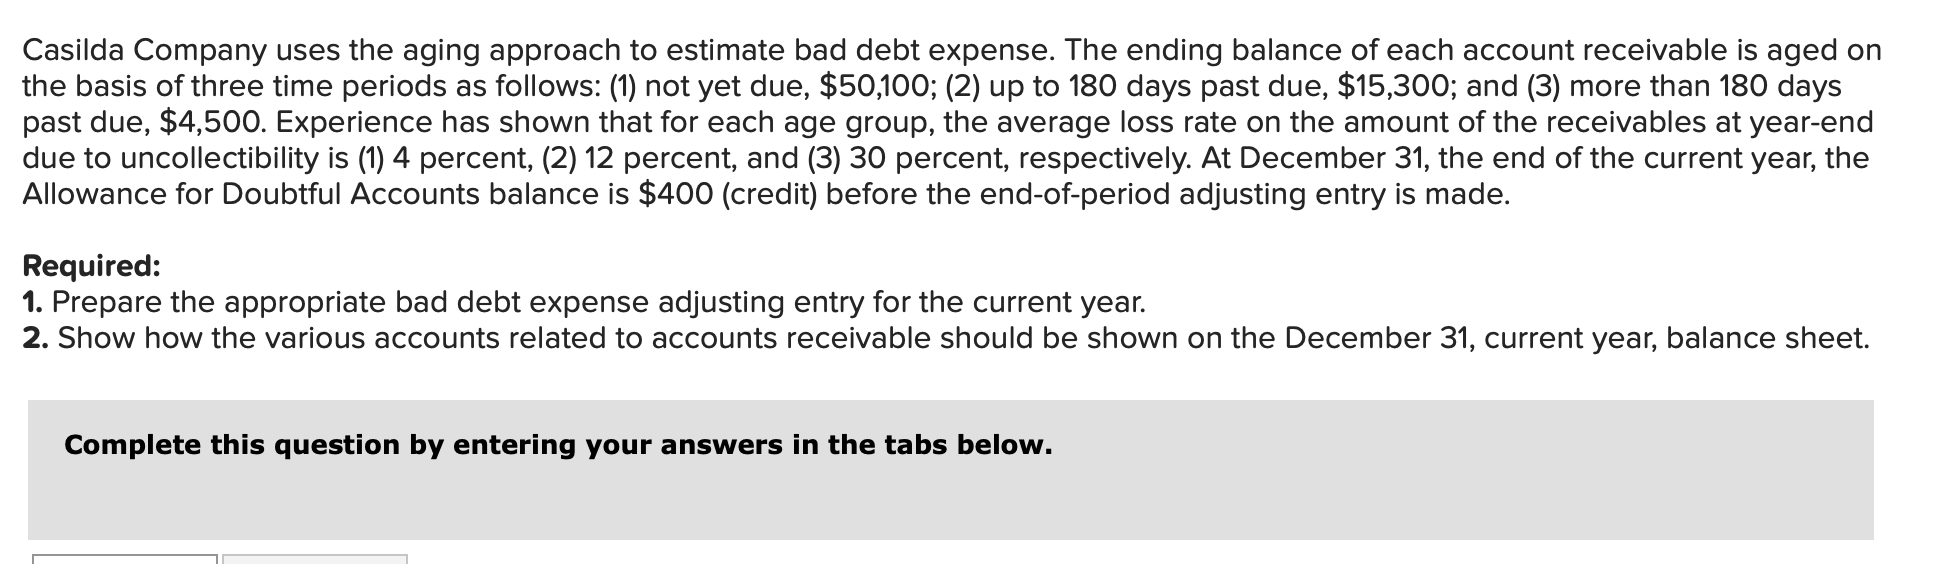 Casilda Company uses the aging approach to estimate bad debt expense. The ending balance of each account receivable is aged on
the basis of three time periods as follows: (1) not yet due, $50,100; (2) up to 180 days past due, $15,300; and (3) more than 180 days
past due, $4,500. Experience has shown that for each age group, the average loss rate on the amount of the receivables at year-end
due to uncollectibility is (1) 4 percent, (2) 12 percent, and (3) 30 percent, respectively. At December 31, the end of the current year, the
Allowance for Doubtful Accounts balance is $400 (credit) before the end-of-period adjusting entry is made.
Required:
1. Prepare the appropriate bad debt expense adjusting entry for the current year.
2. Show how the various accounts related to accounts receivable should be shown on the December 31, current year, balance sheet
Complete this question by entering your answers in the tabs below.
